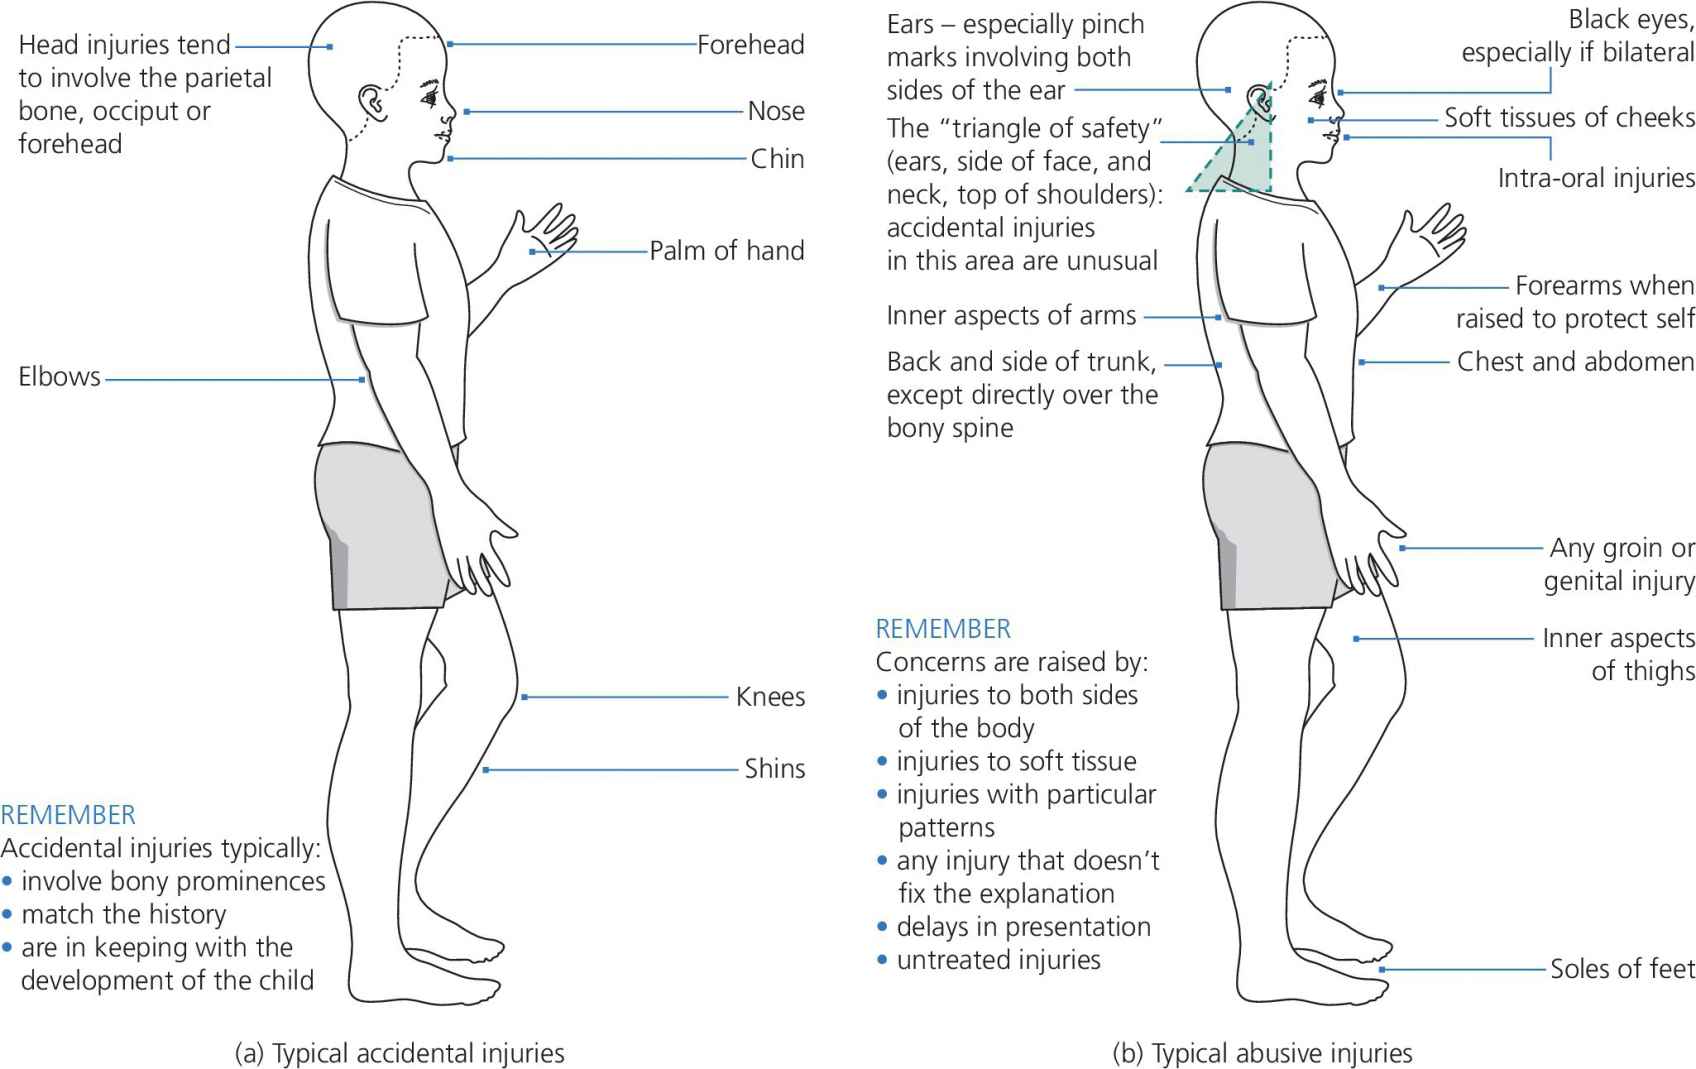 Two illustrations of a child with labeled areas of the body that can be subject to accidental injuries (left) and non-accidental injuries (right).